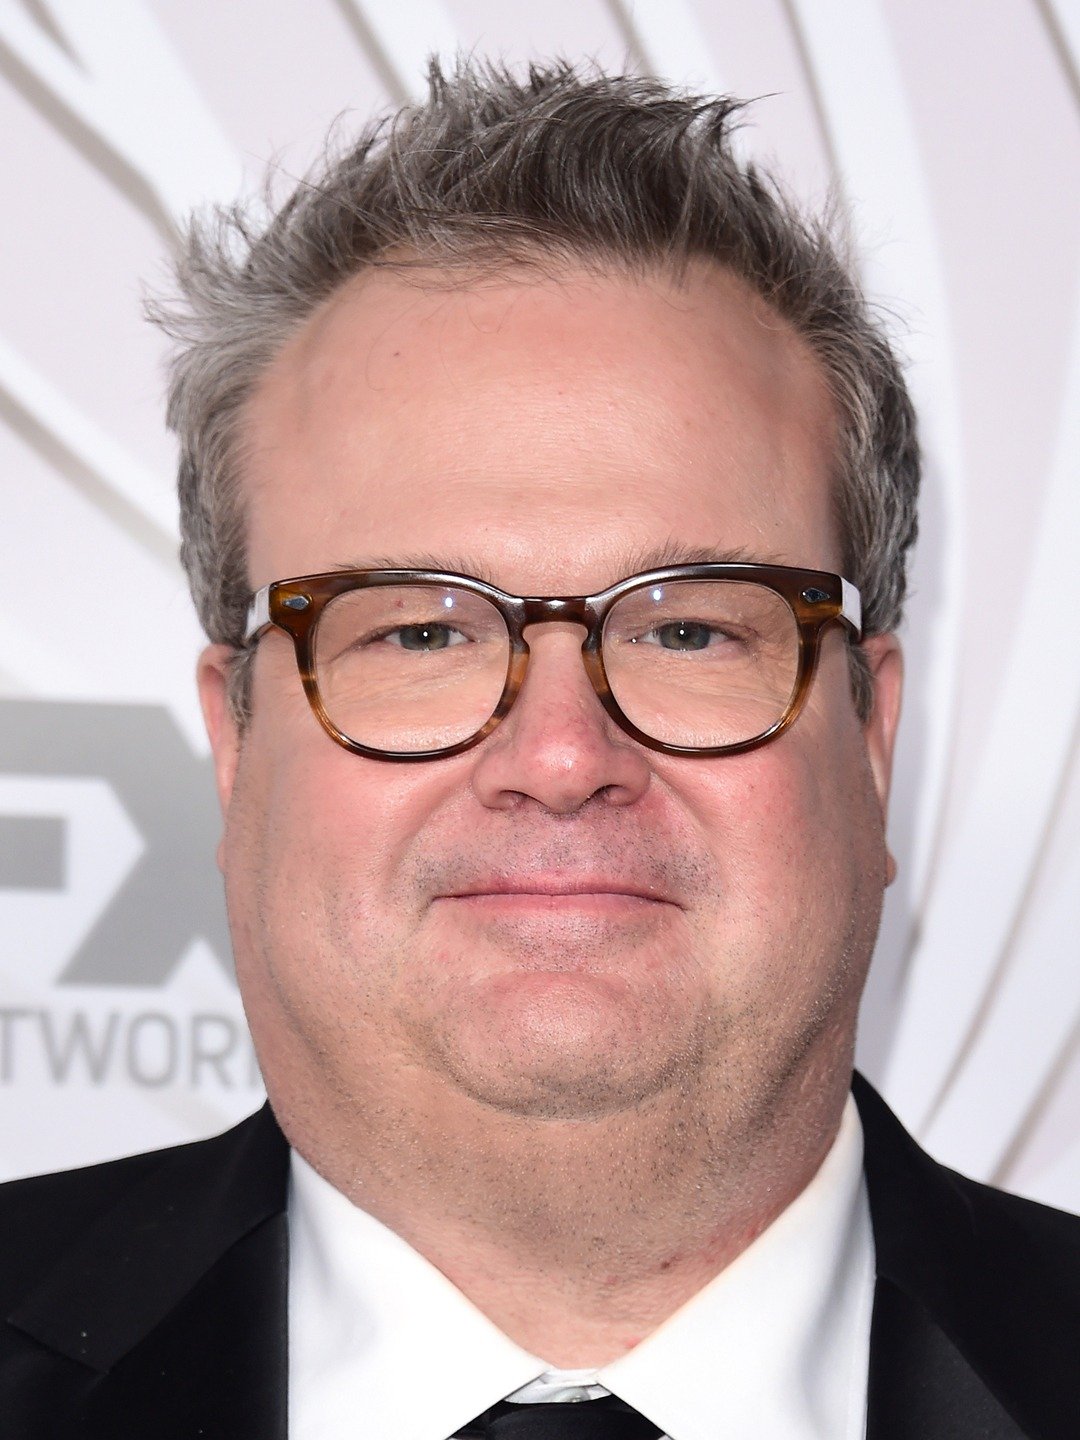 10 Most Interesting Facts About: Eric Stonestreet